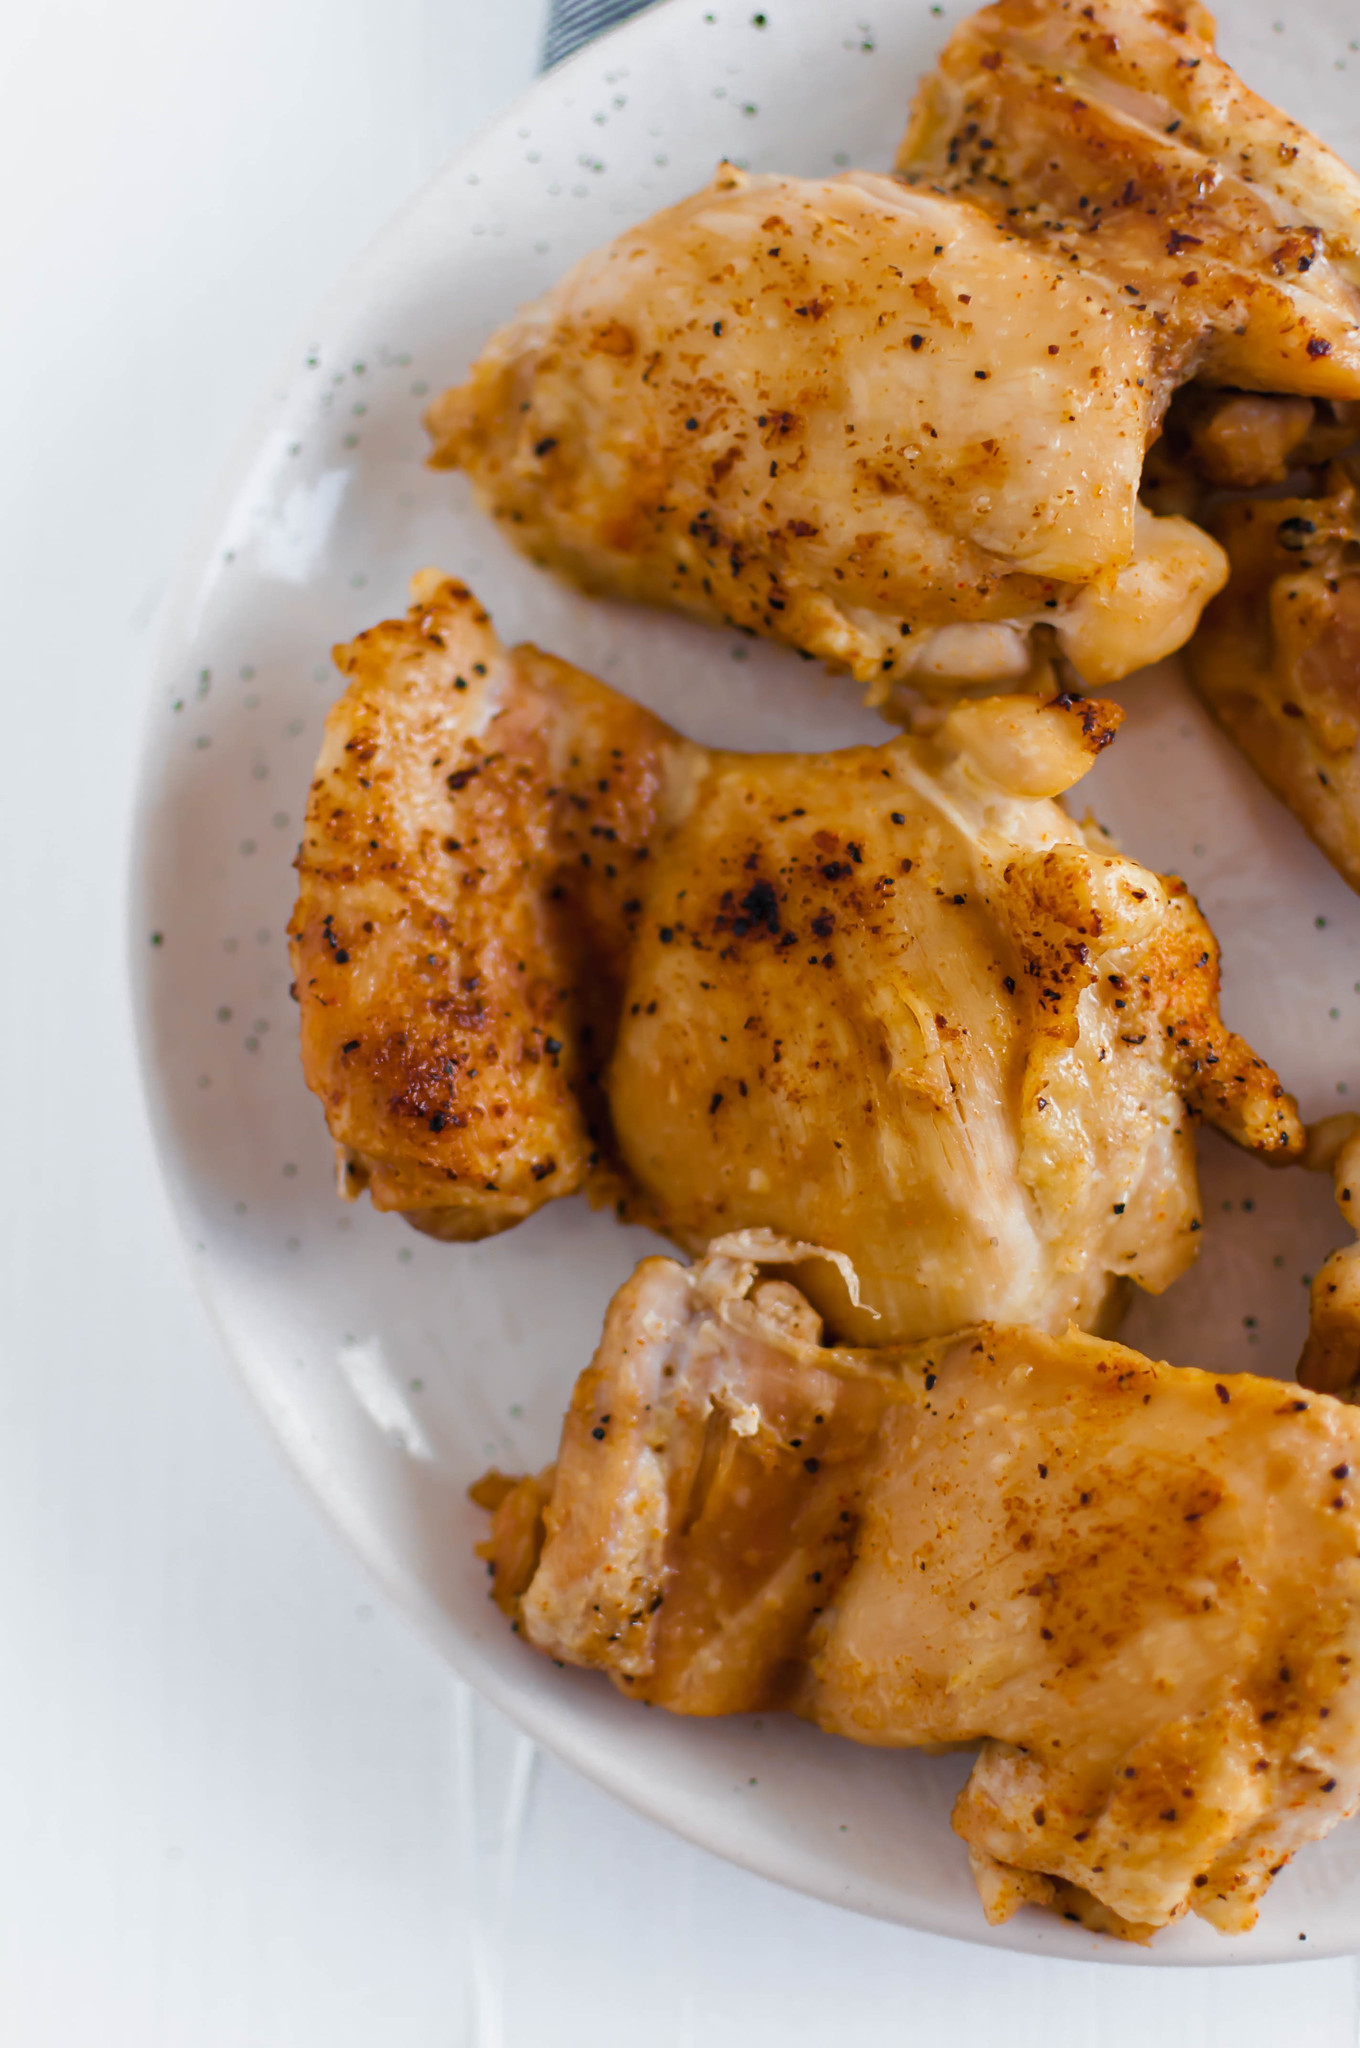 These basic Instant Pot Chicken Thighs will change your meal prep game. Simple to make and so many ways to utilize them. Make a simple pan gravy with the drippings or add to other recipes.